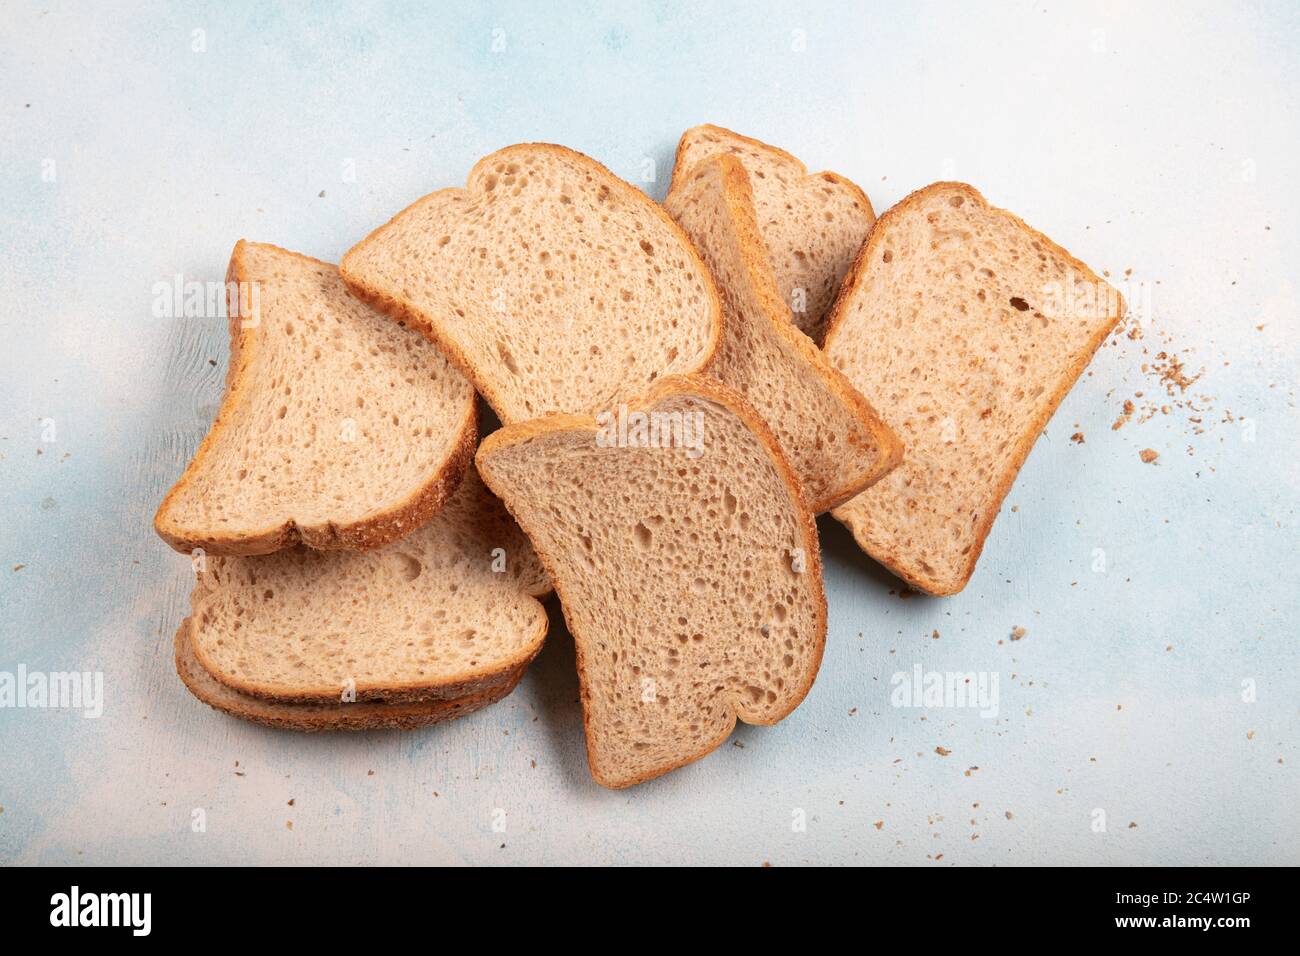 Macrophotography of green mildew on a stale bread. Surface of moldy bread. Spoiled bread with mold. Moldy fungus on rotten bread. Top view. Stock Photo